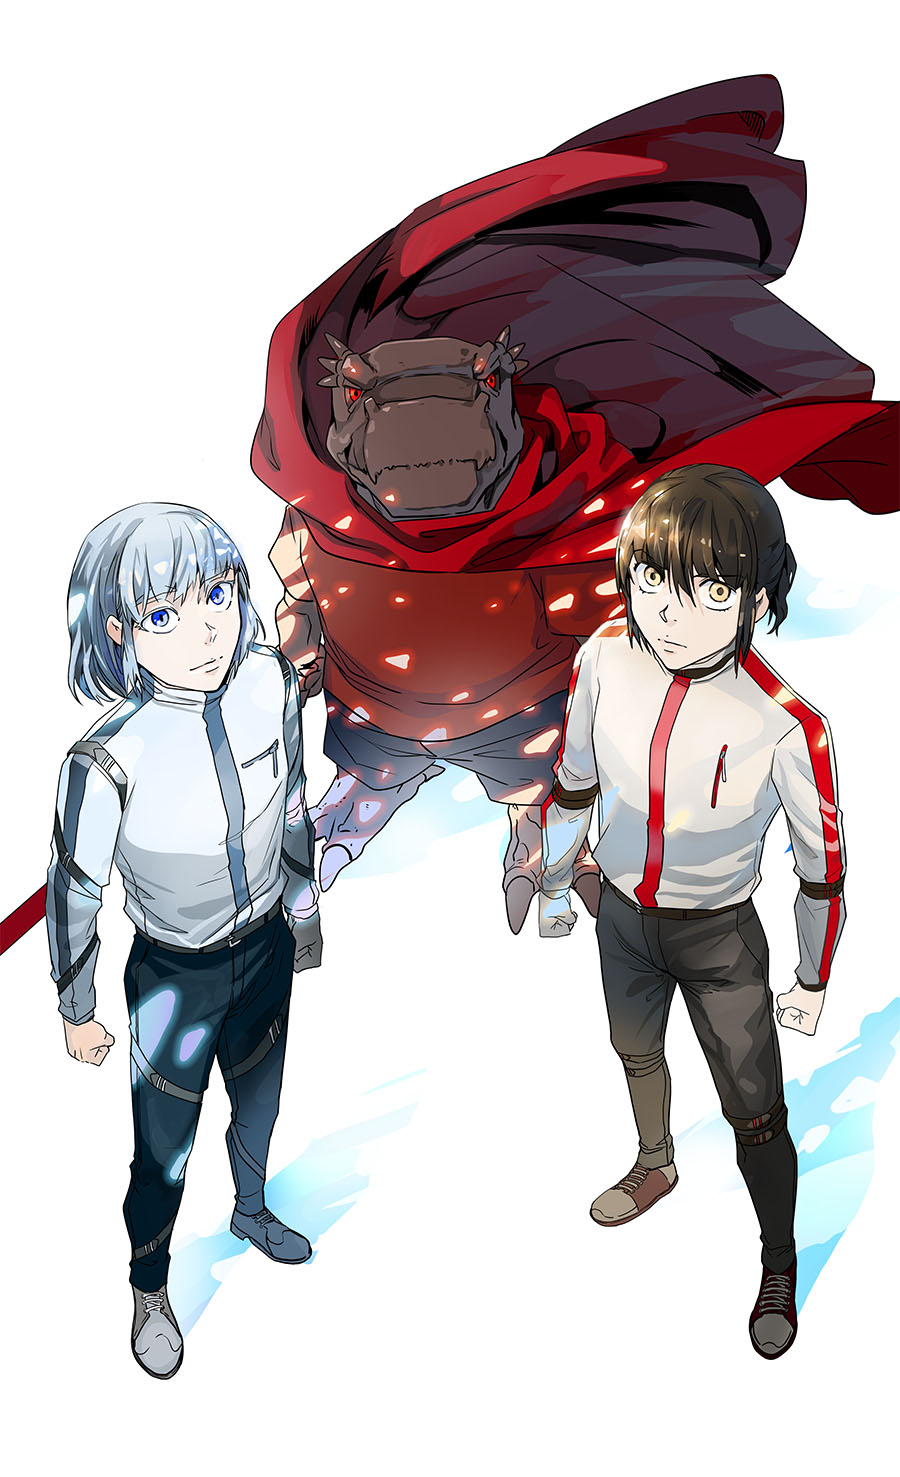 Kami no Tou (Tower of God) Review – WEBTOON's Wonder Child Comes Out on Top  — The Geek Media Revue